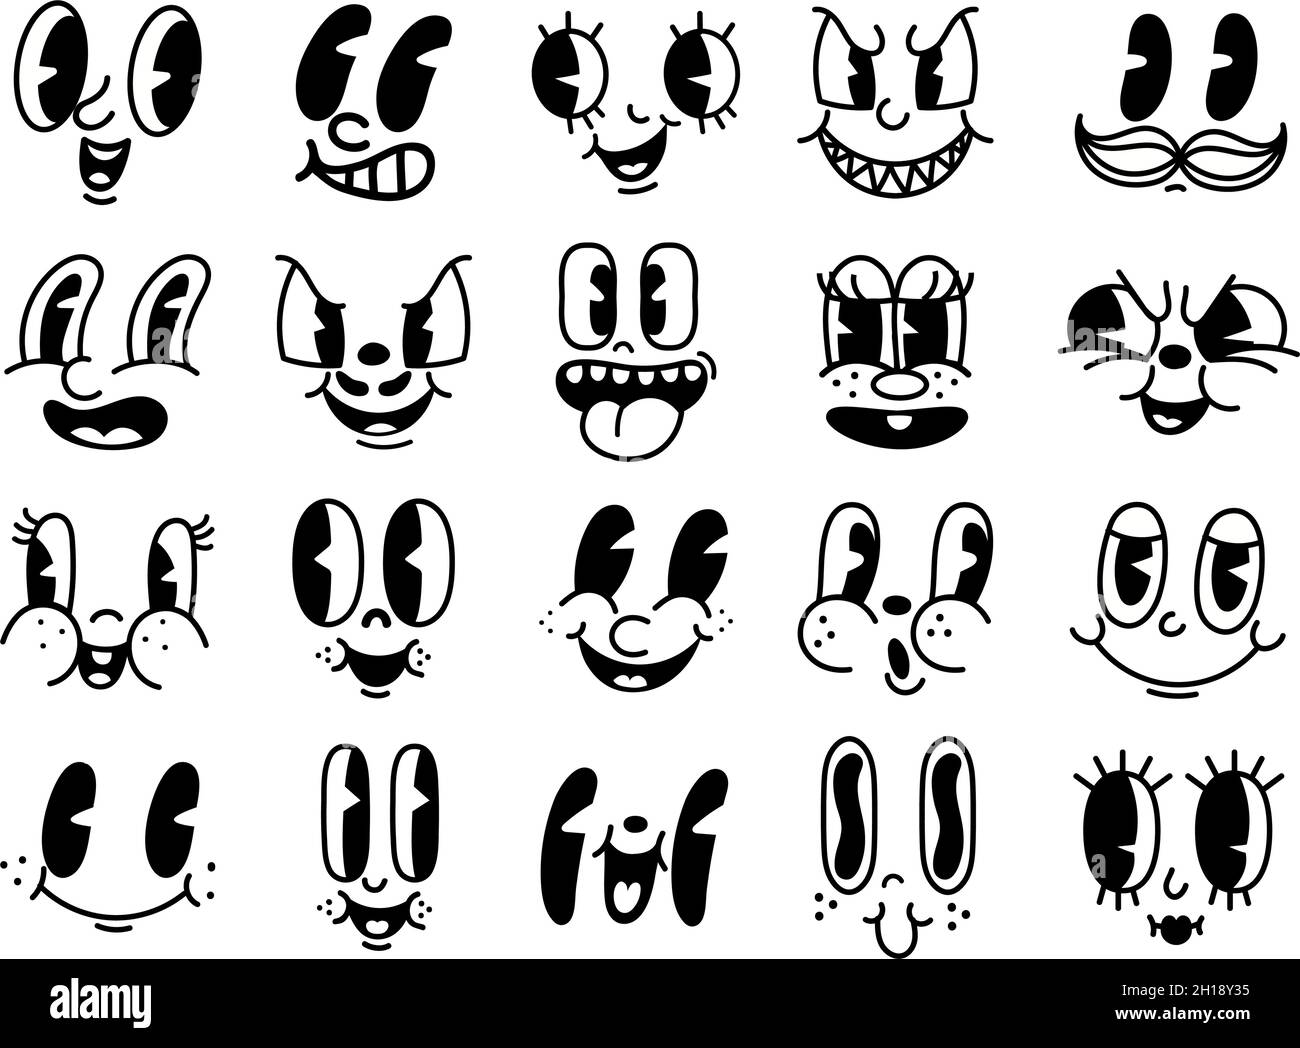 Vintage 50s cartoon and comic happy facial expressions. Old animation funny face caricatures. Retro quirky characters smile emoji vector set Stock Vector